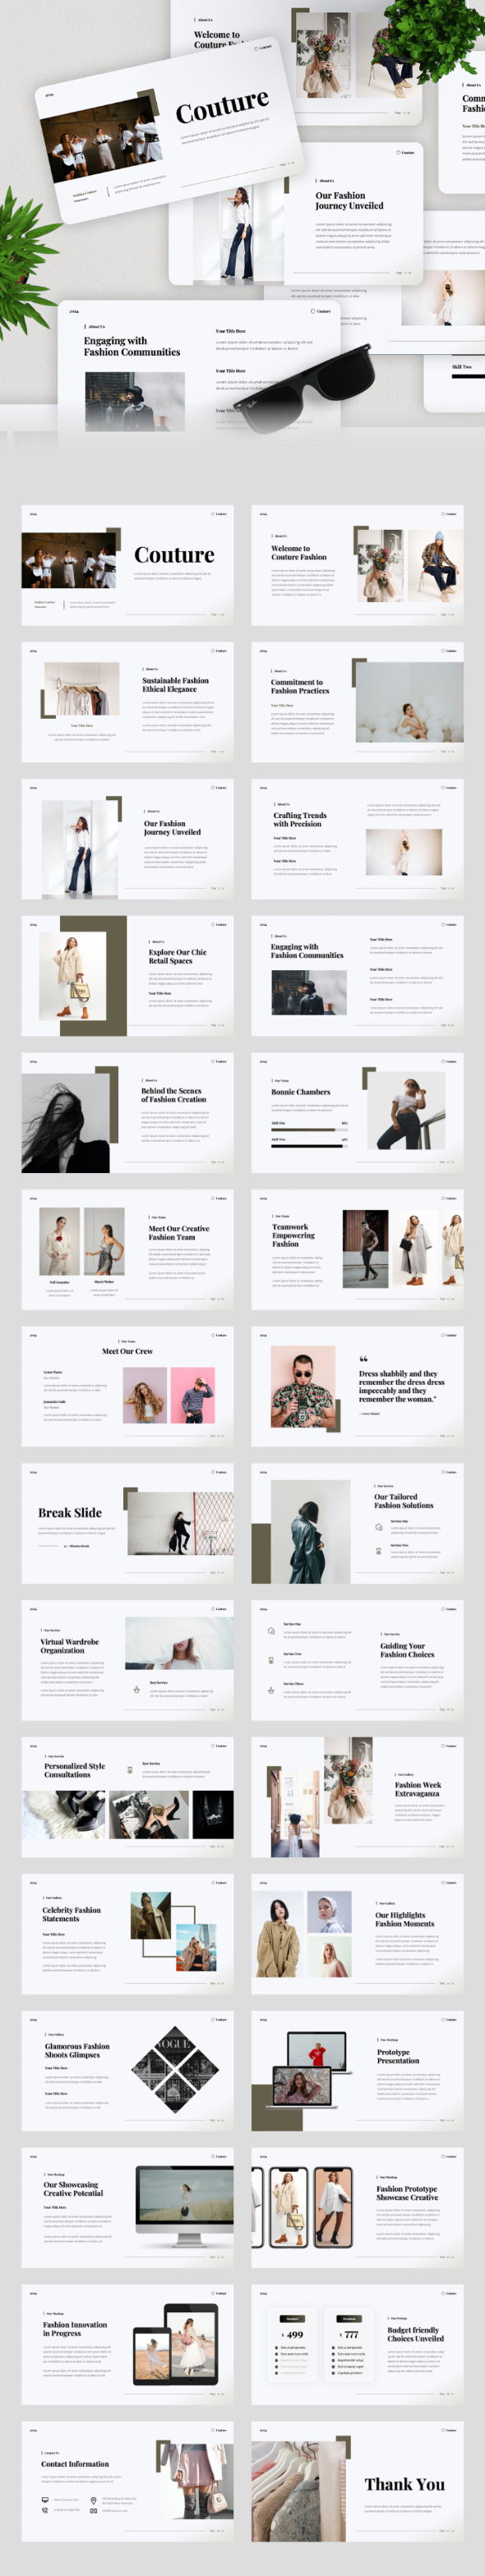 [DOWNLOAD]Couture - Fashion Google Slides Template